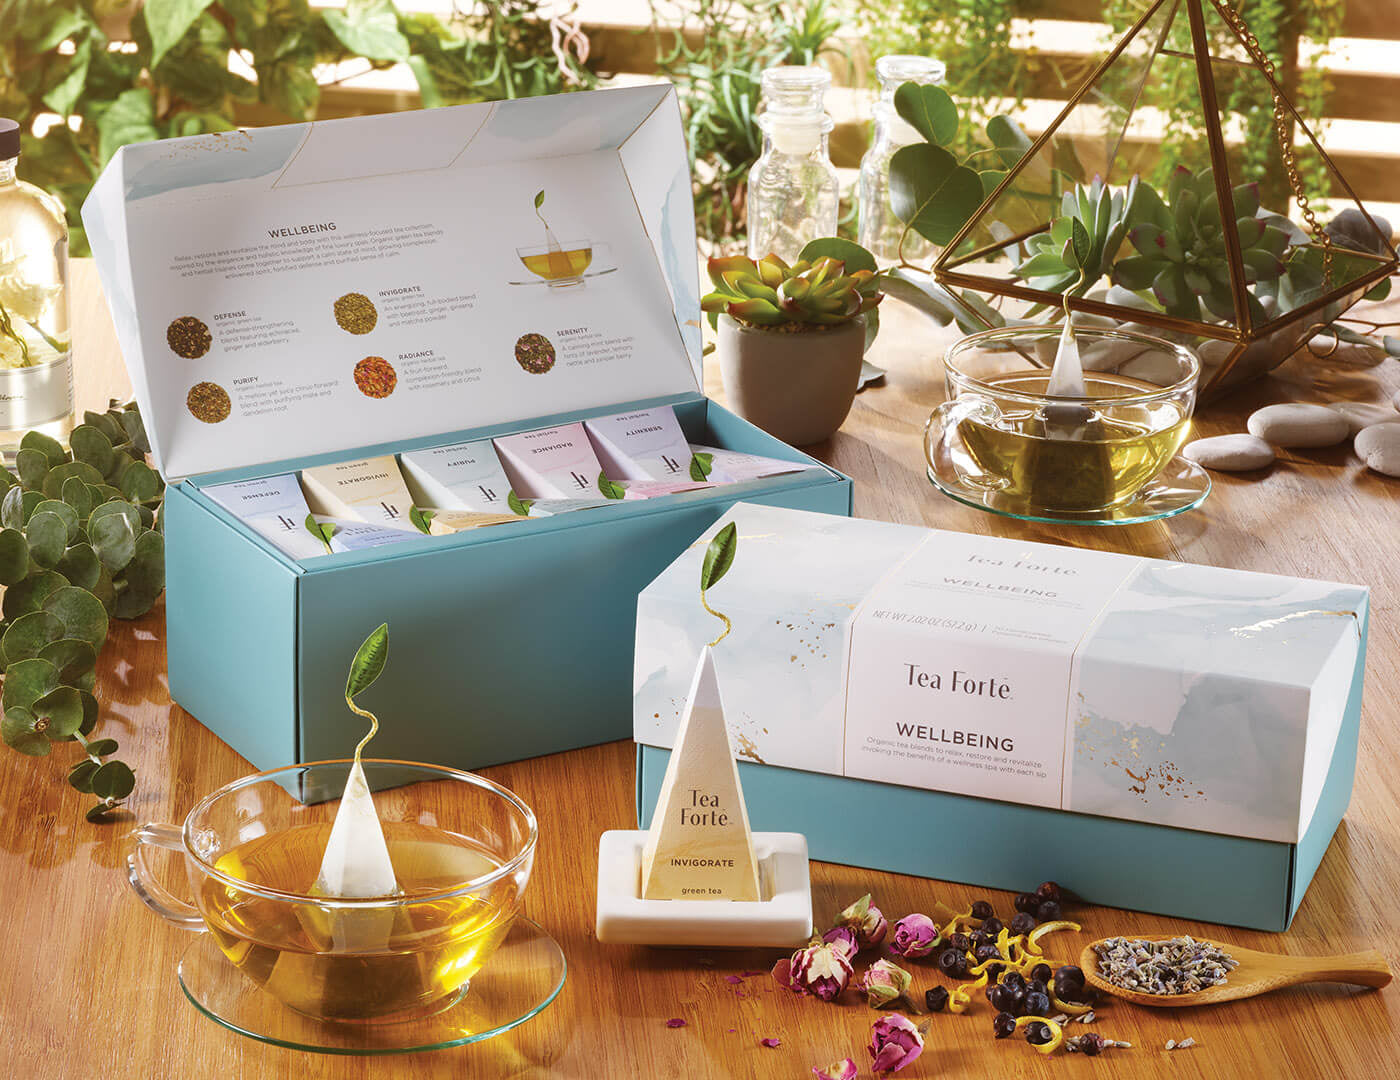 Wellbeing tea assortment in a 20 count presentation box on table